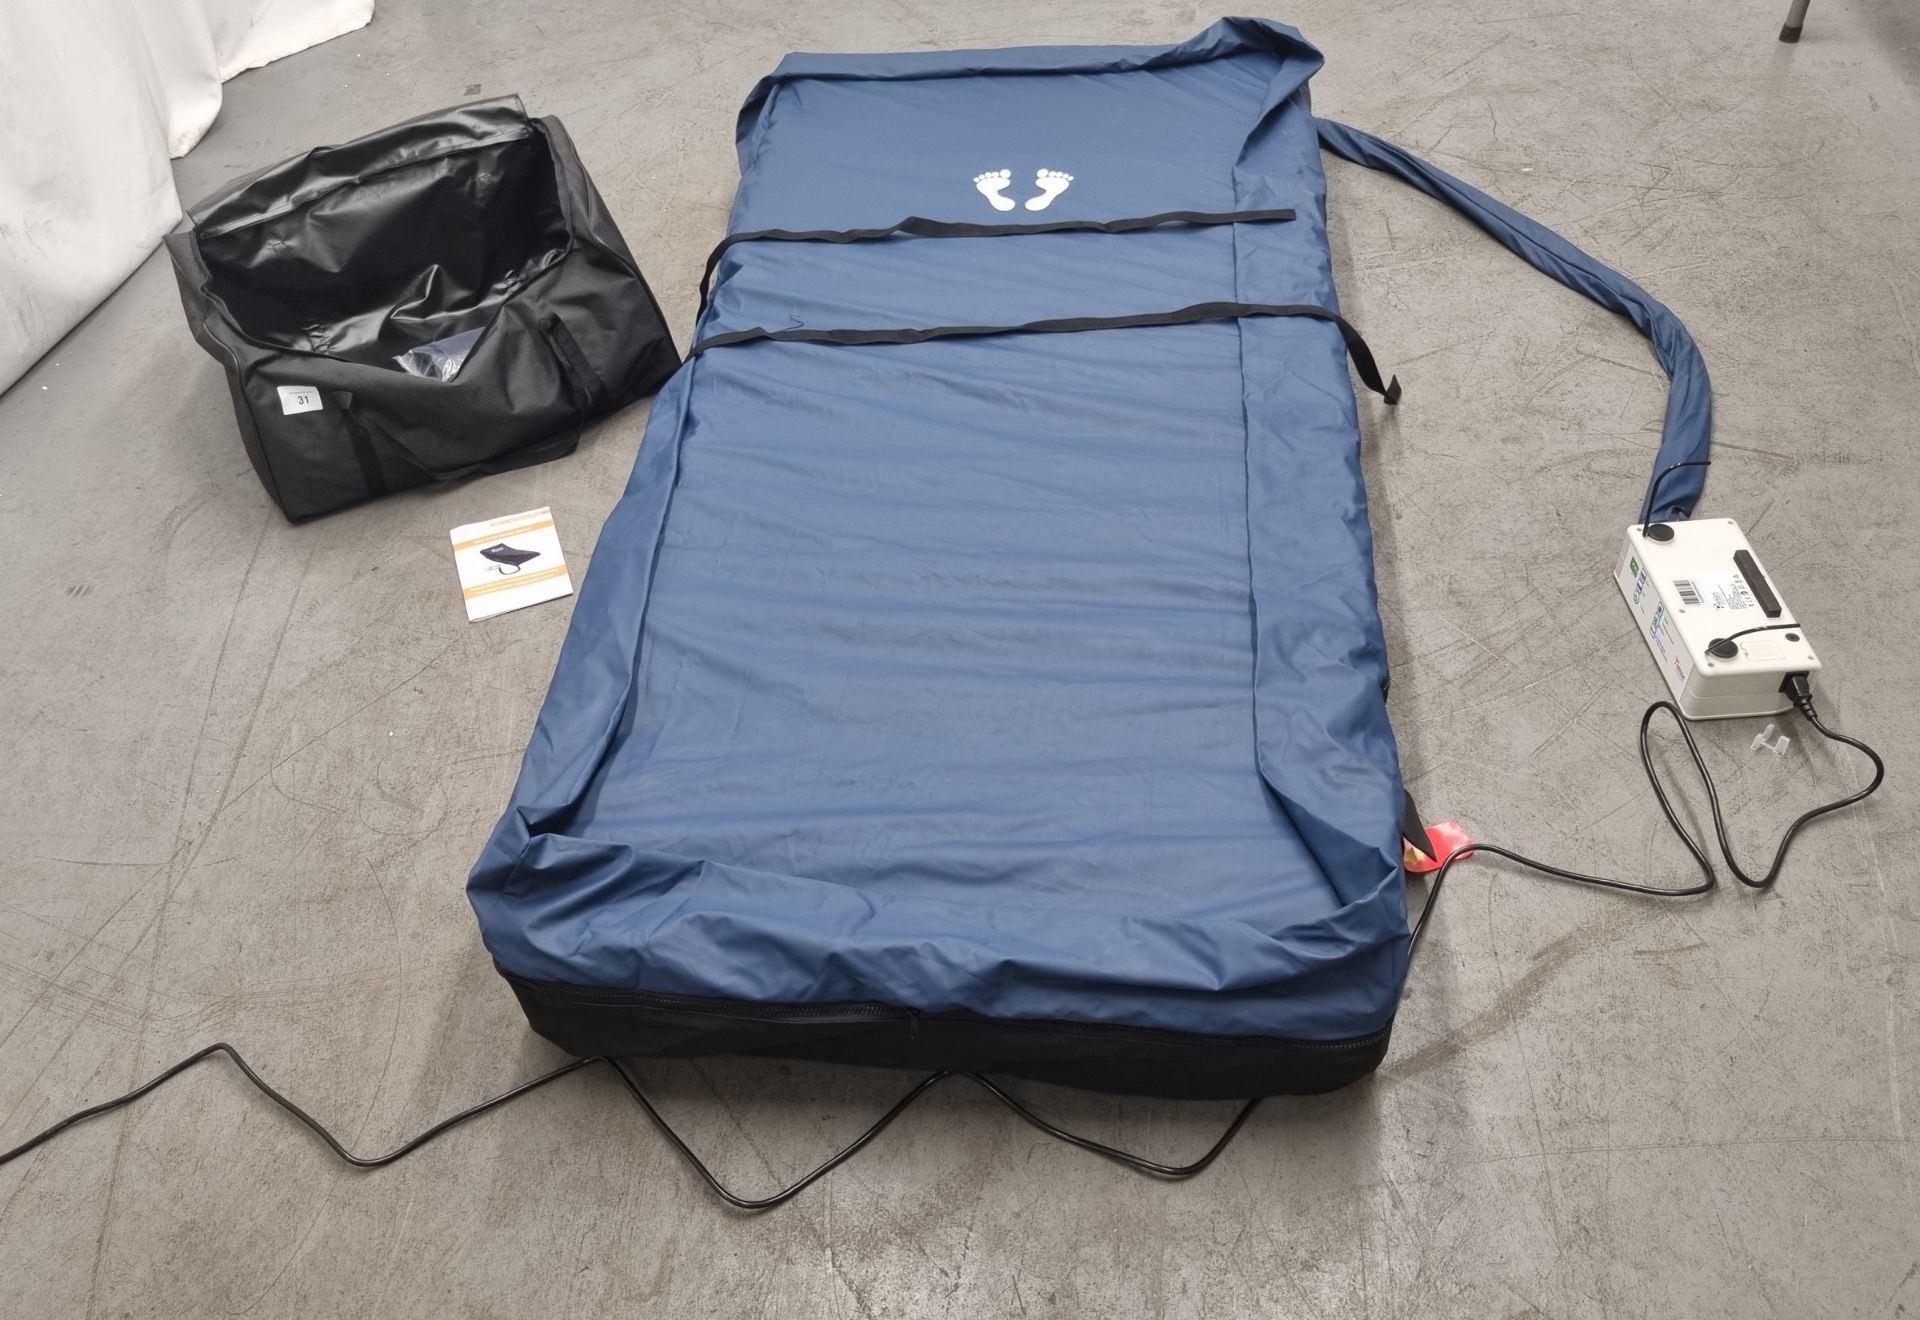 Herida Argyll II dynamic airflow mattress system with digital pump - unused in carry bag - Image 2 of 9